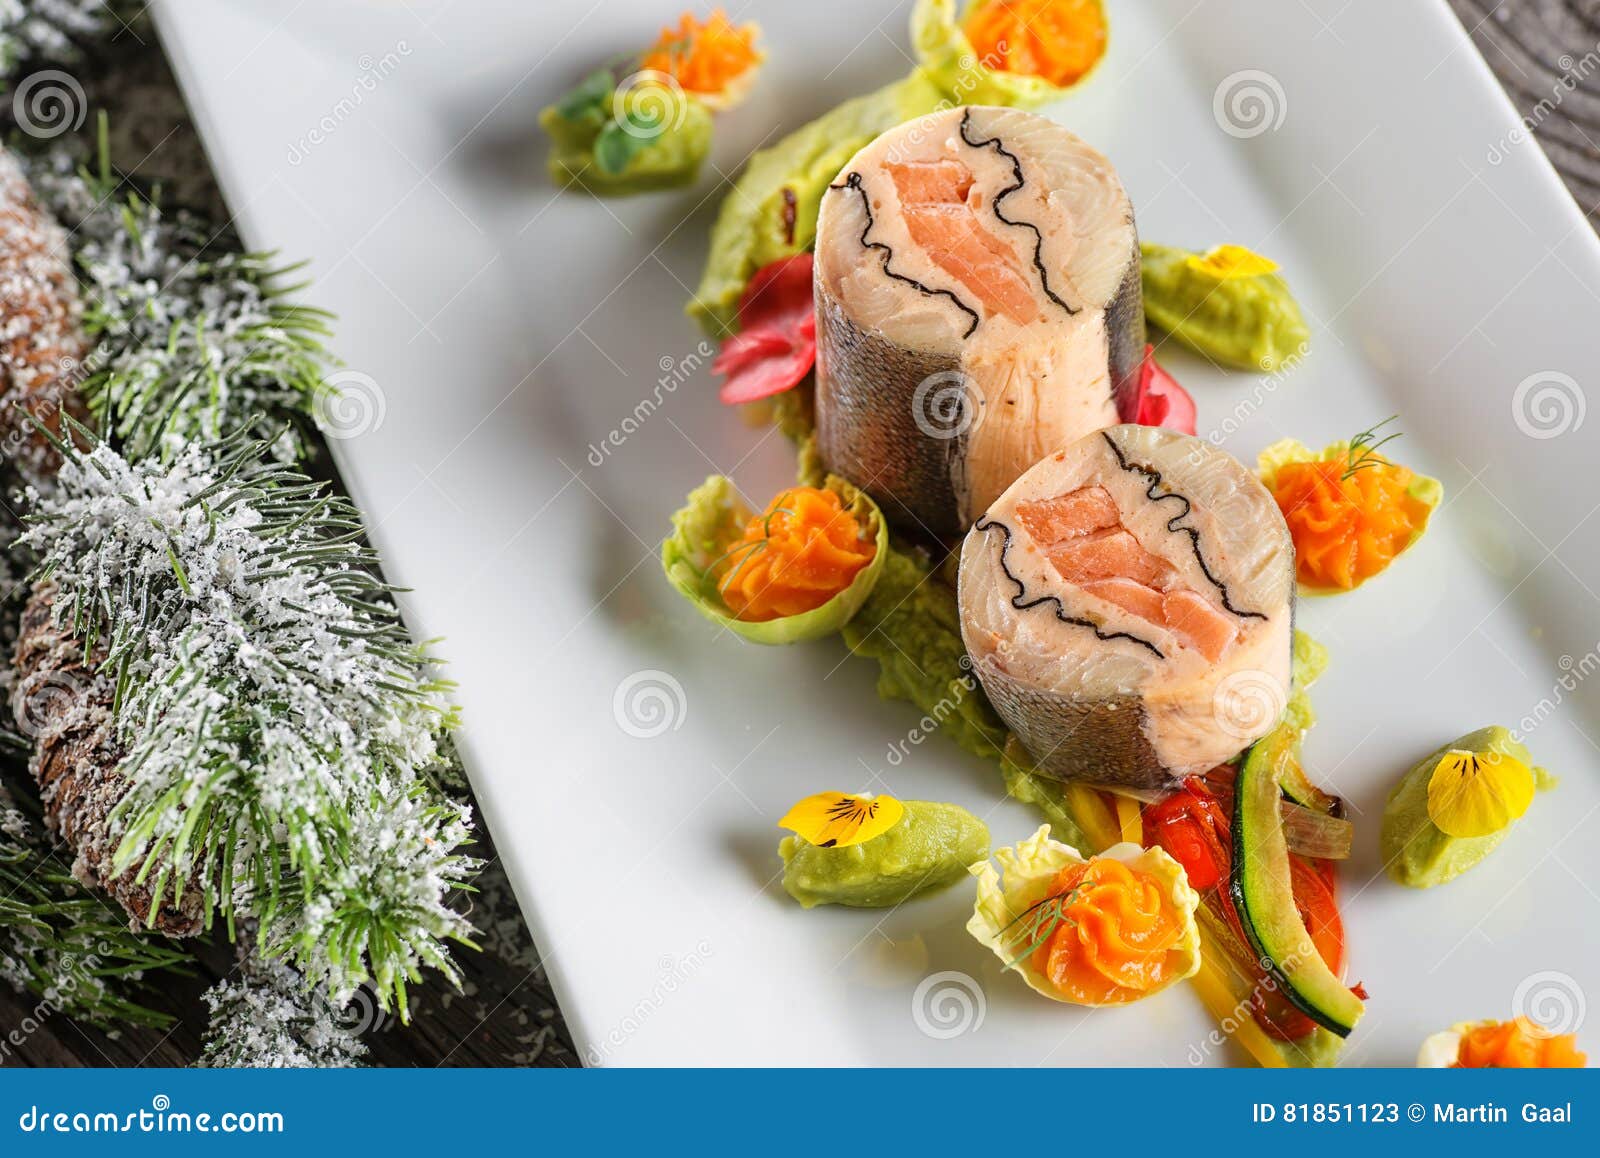 fish starter food on white plate with christmas decoration. product photography and modern gastronomy